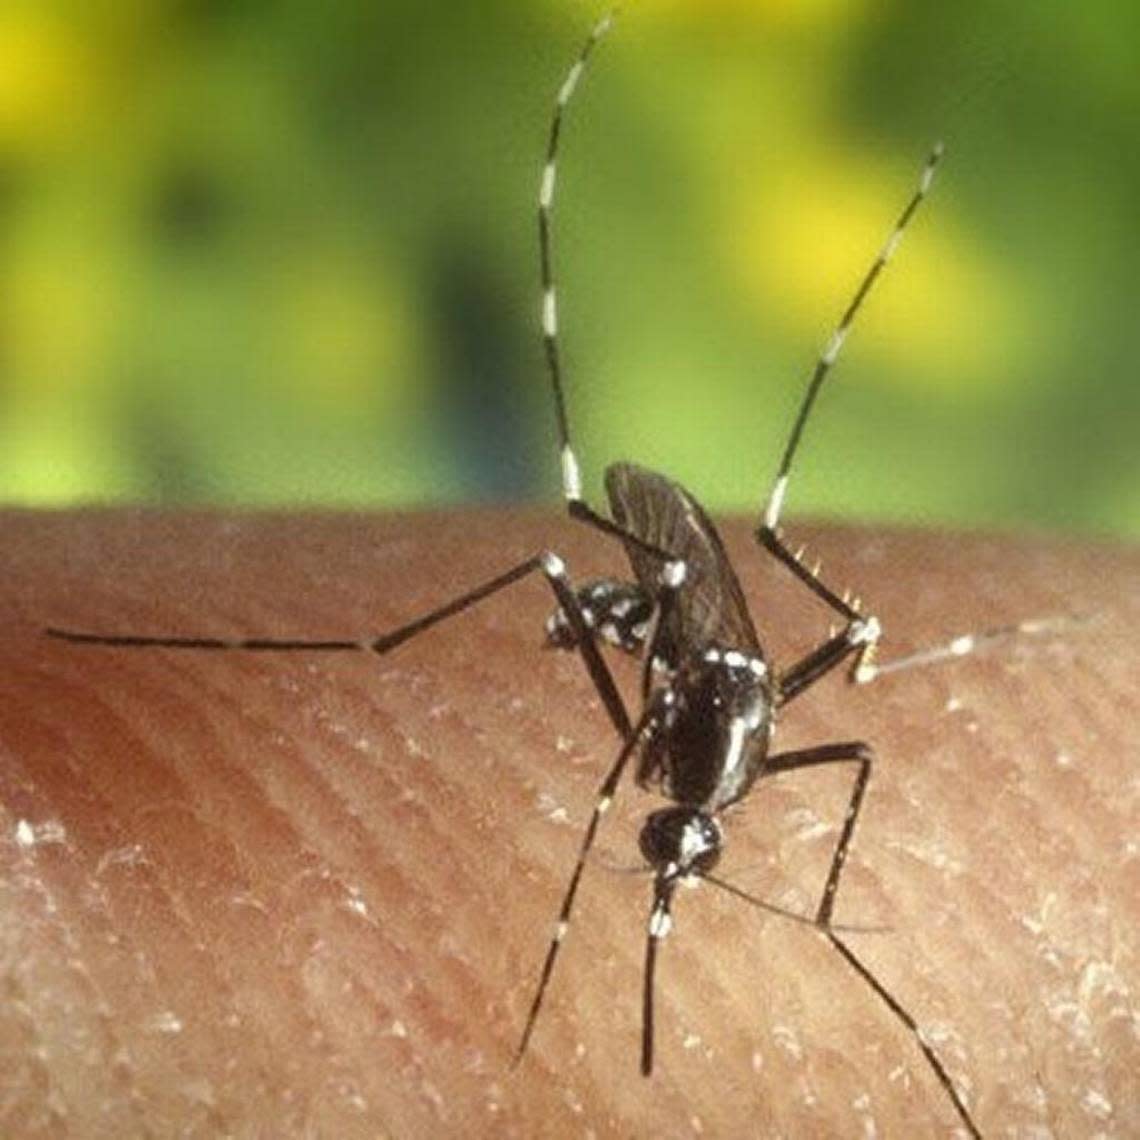 The Asian tiger mosquito (Aedes albopictus) is “the most prevalent species across the state, particularly in large urban areas,” according to Michael Waldvogel of N.C. State. Raleigh